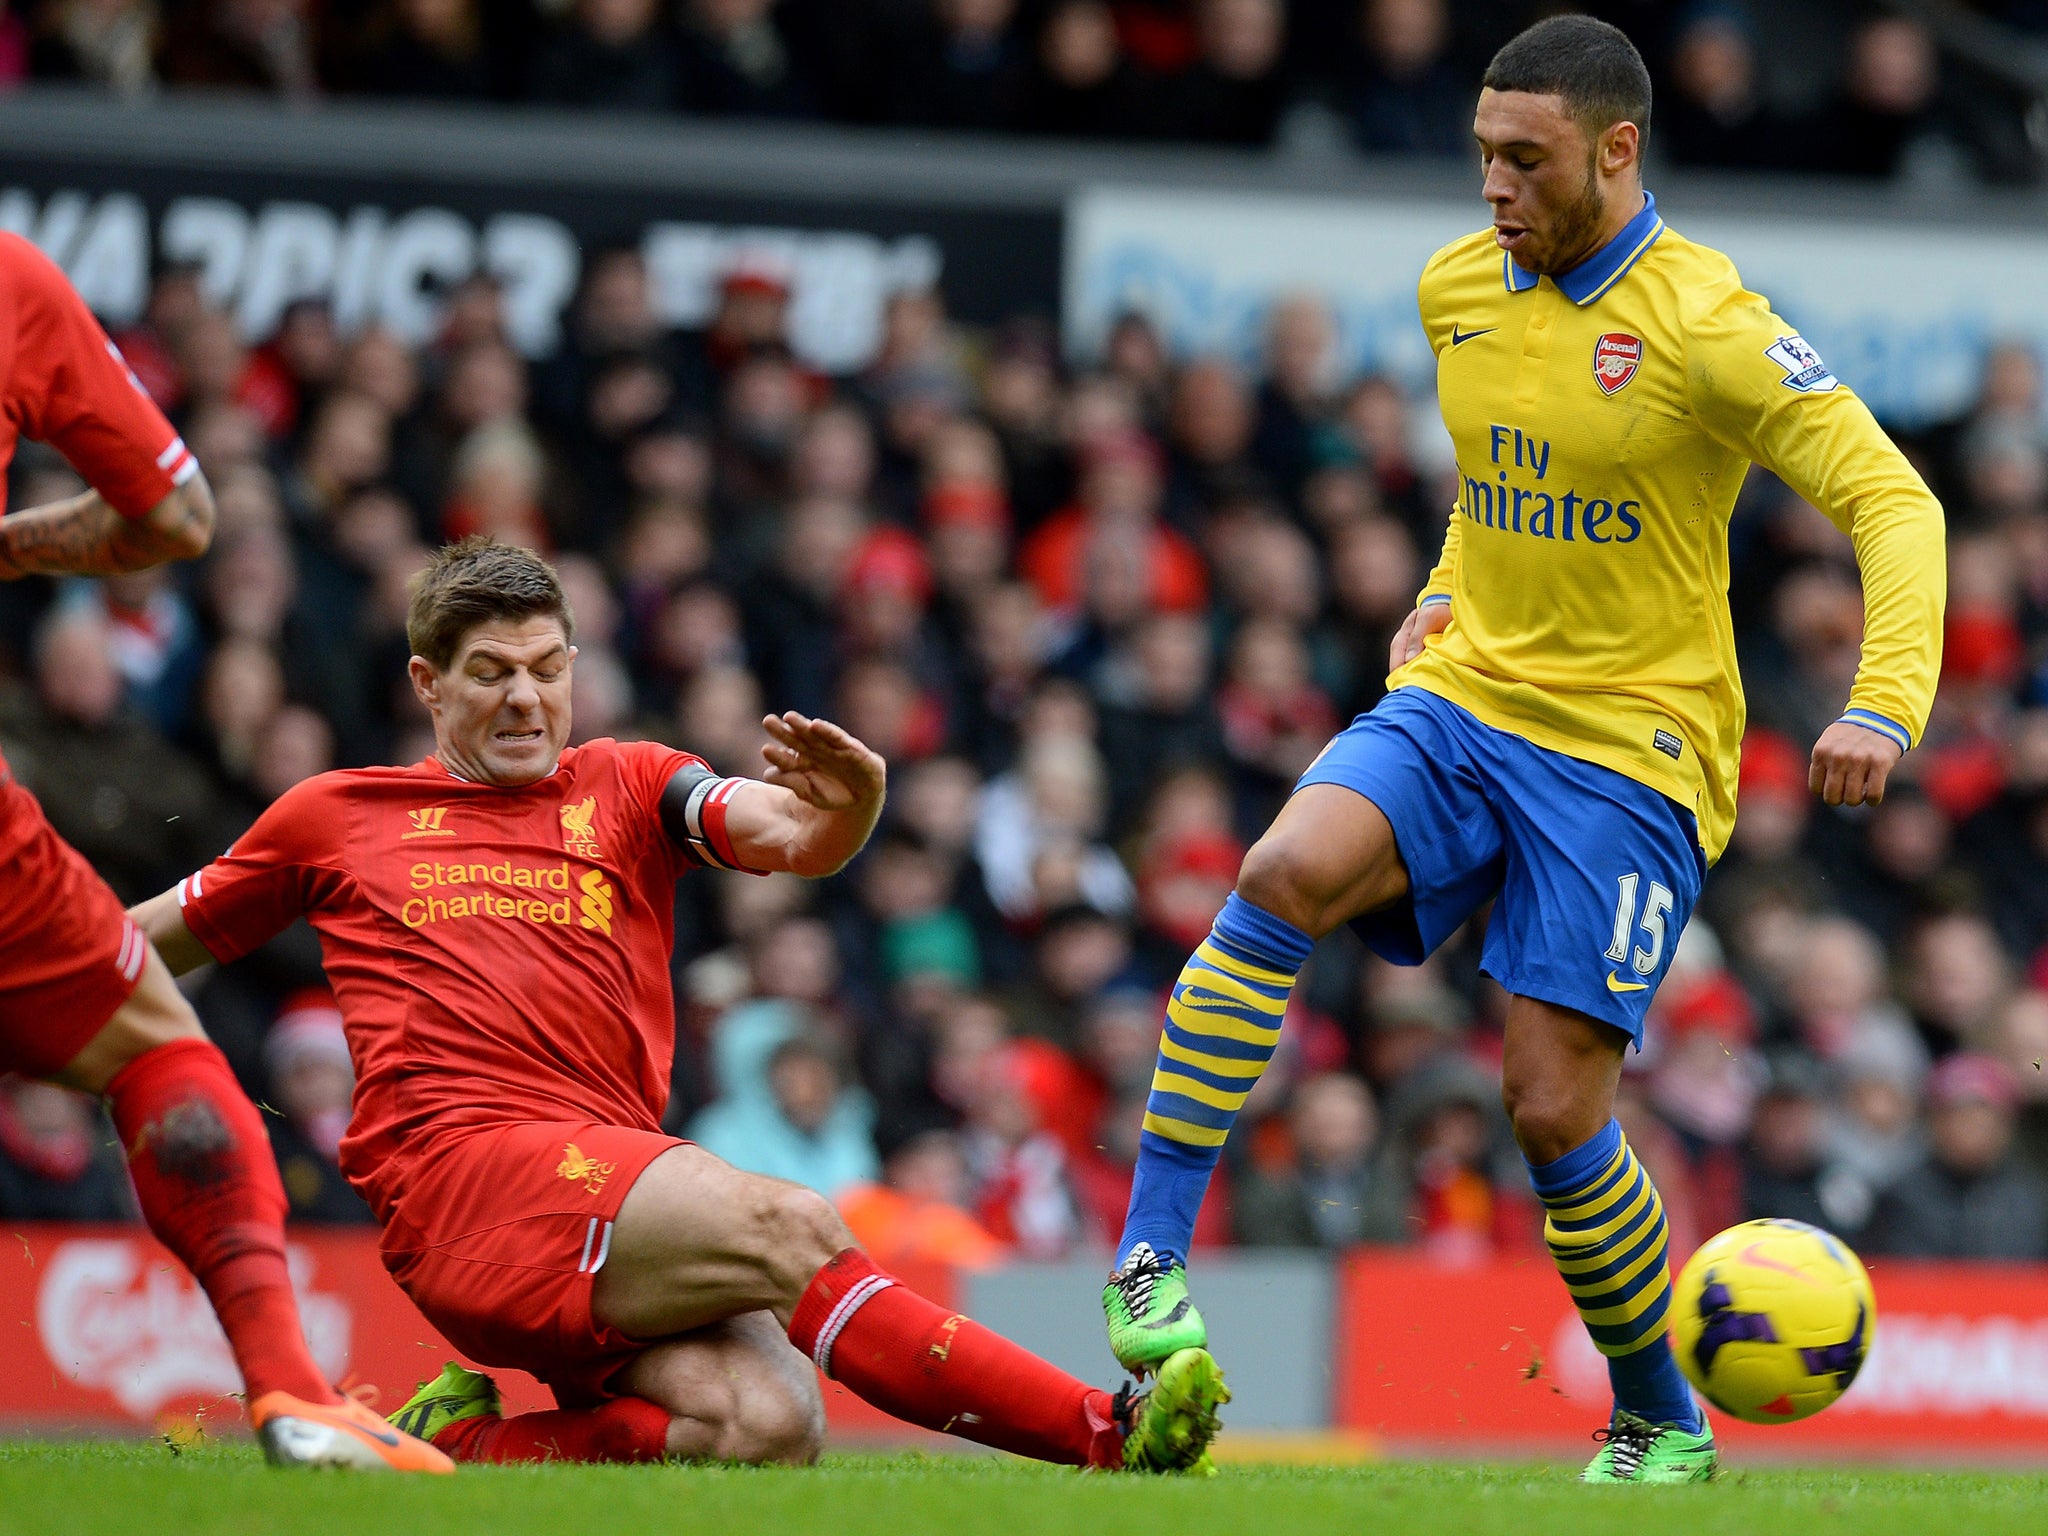 Alex Oxlade-Chamberlain (right) is tackled by Steven Gerrard in Arsenal's 5-1 defeat by Liverpool on Saturday